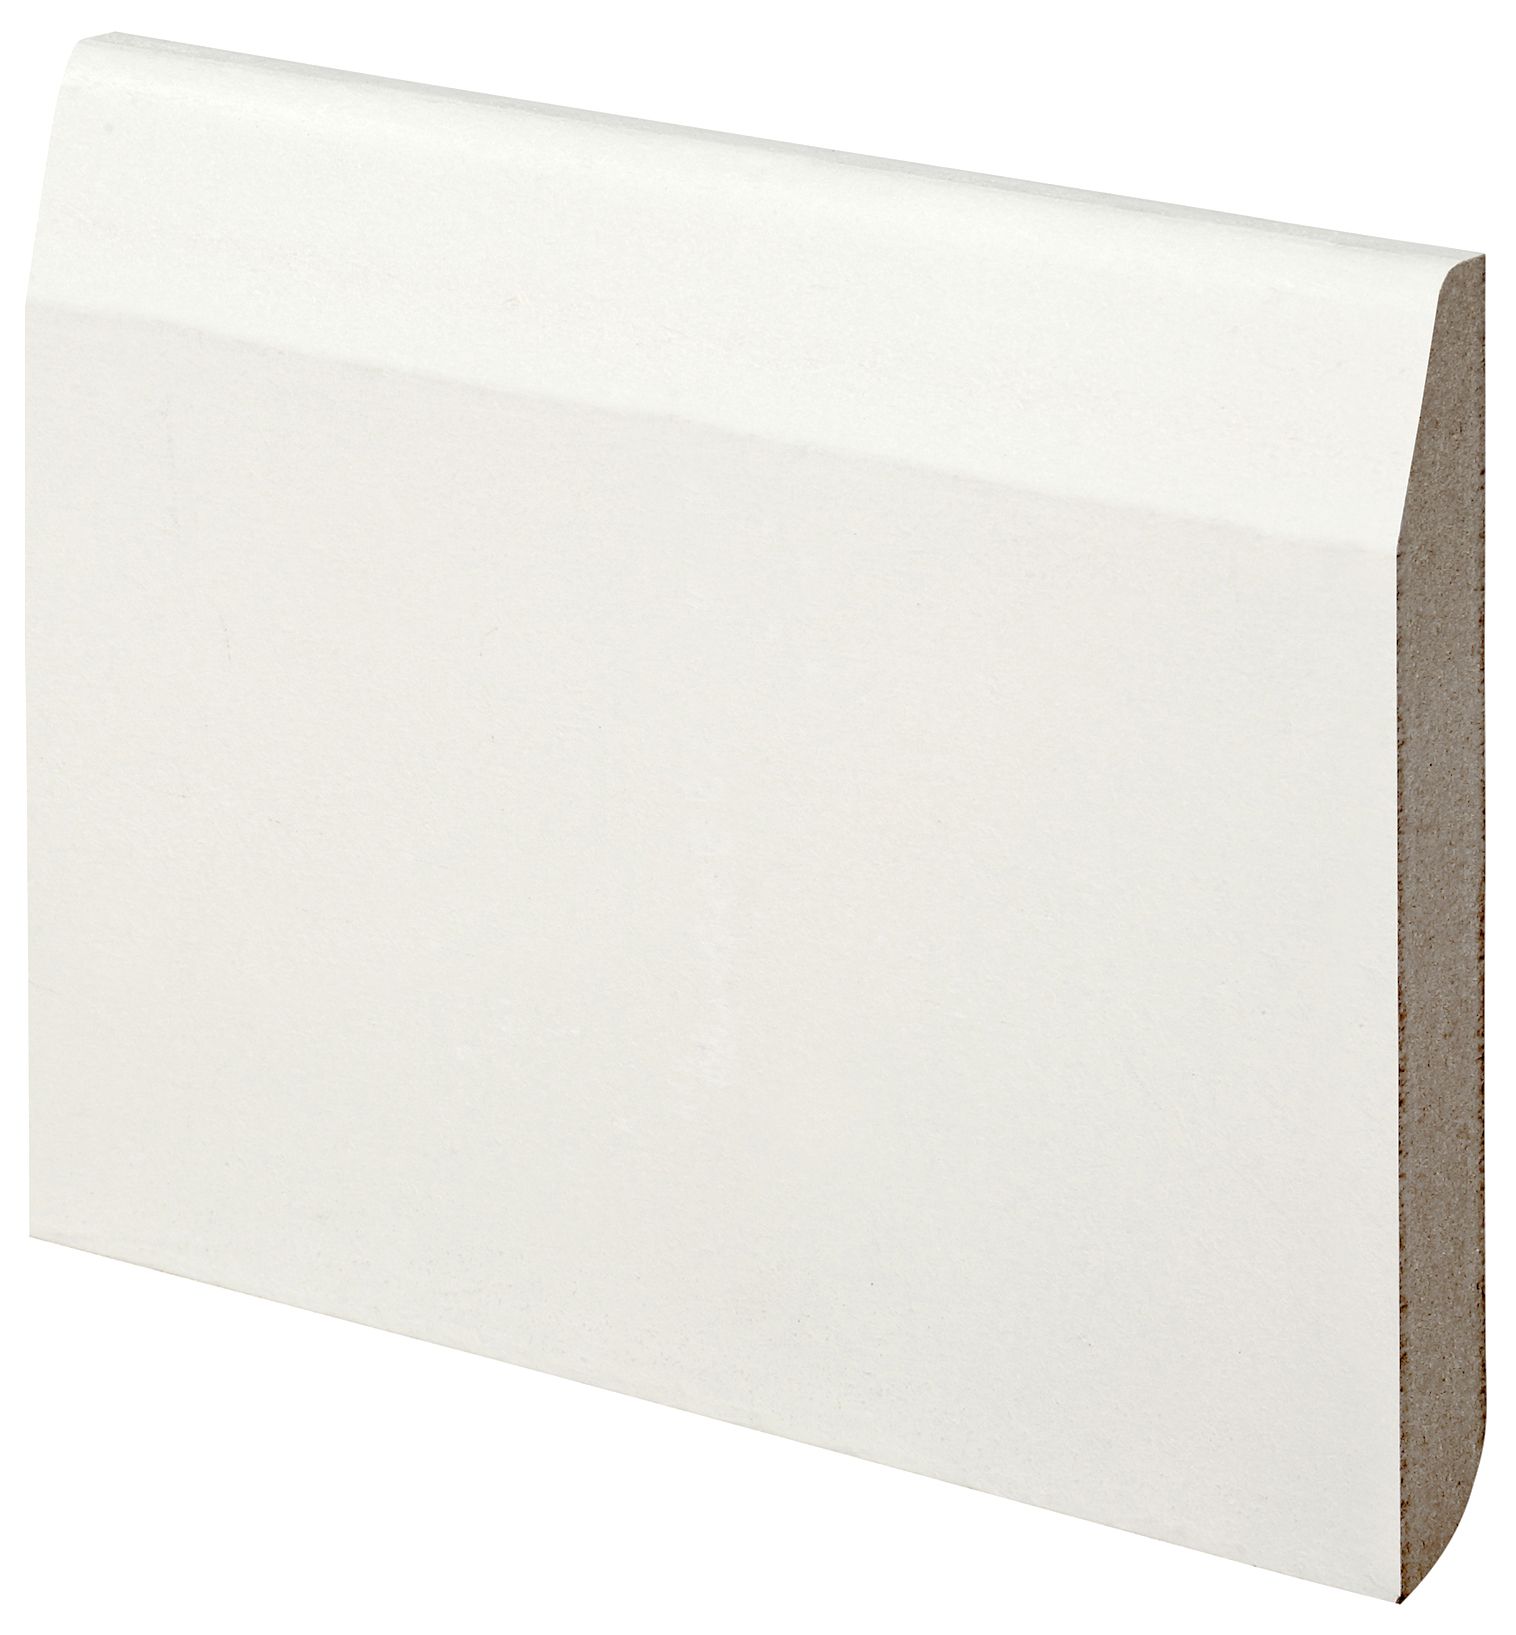 Wickes Chamfered / Bullnose White MDF Skirting - 18 x 119 x 4200mm